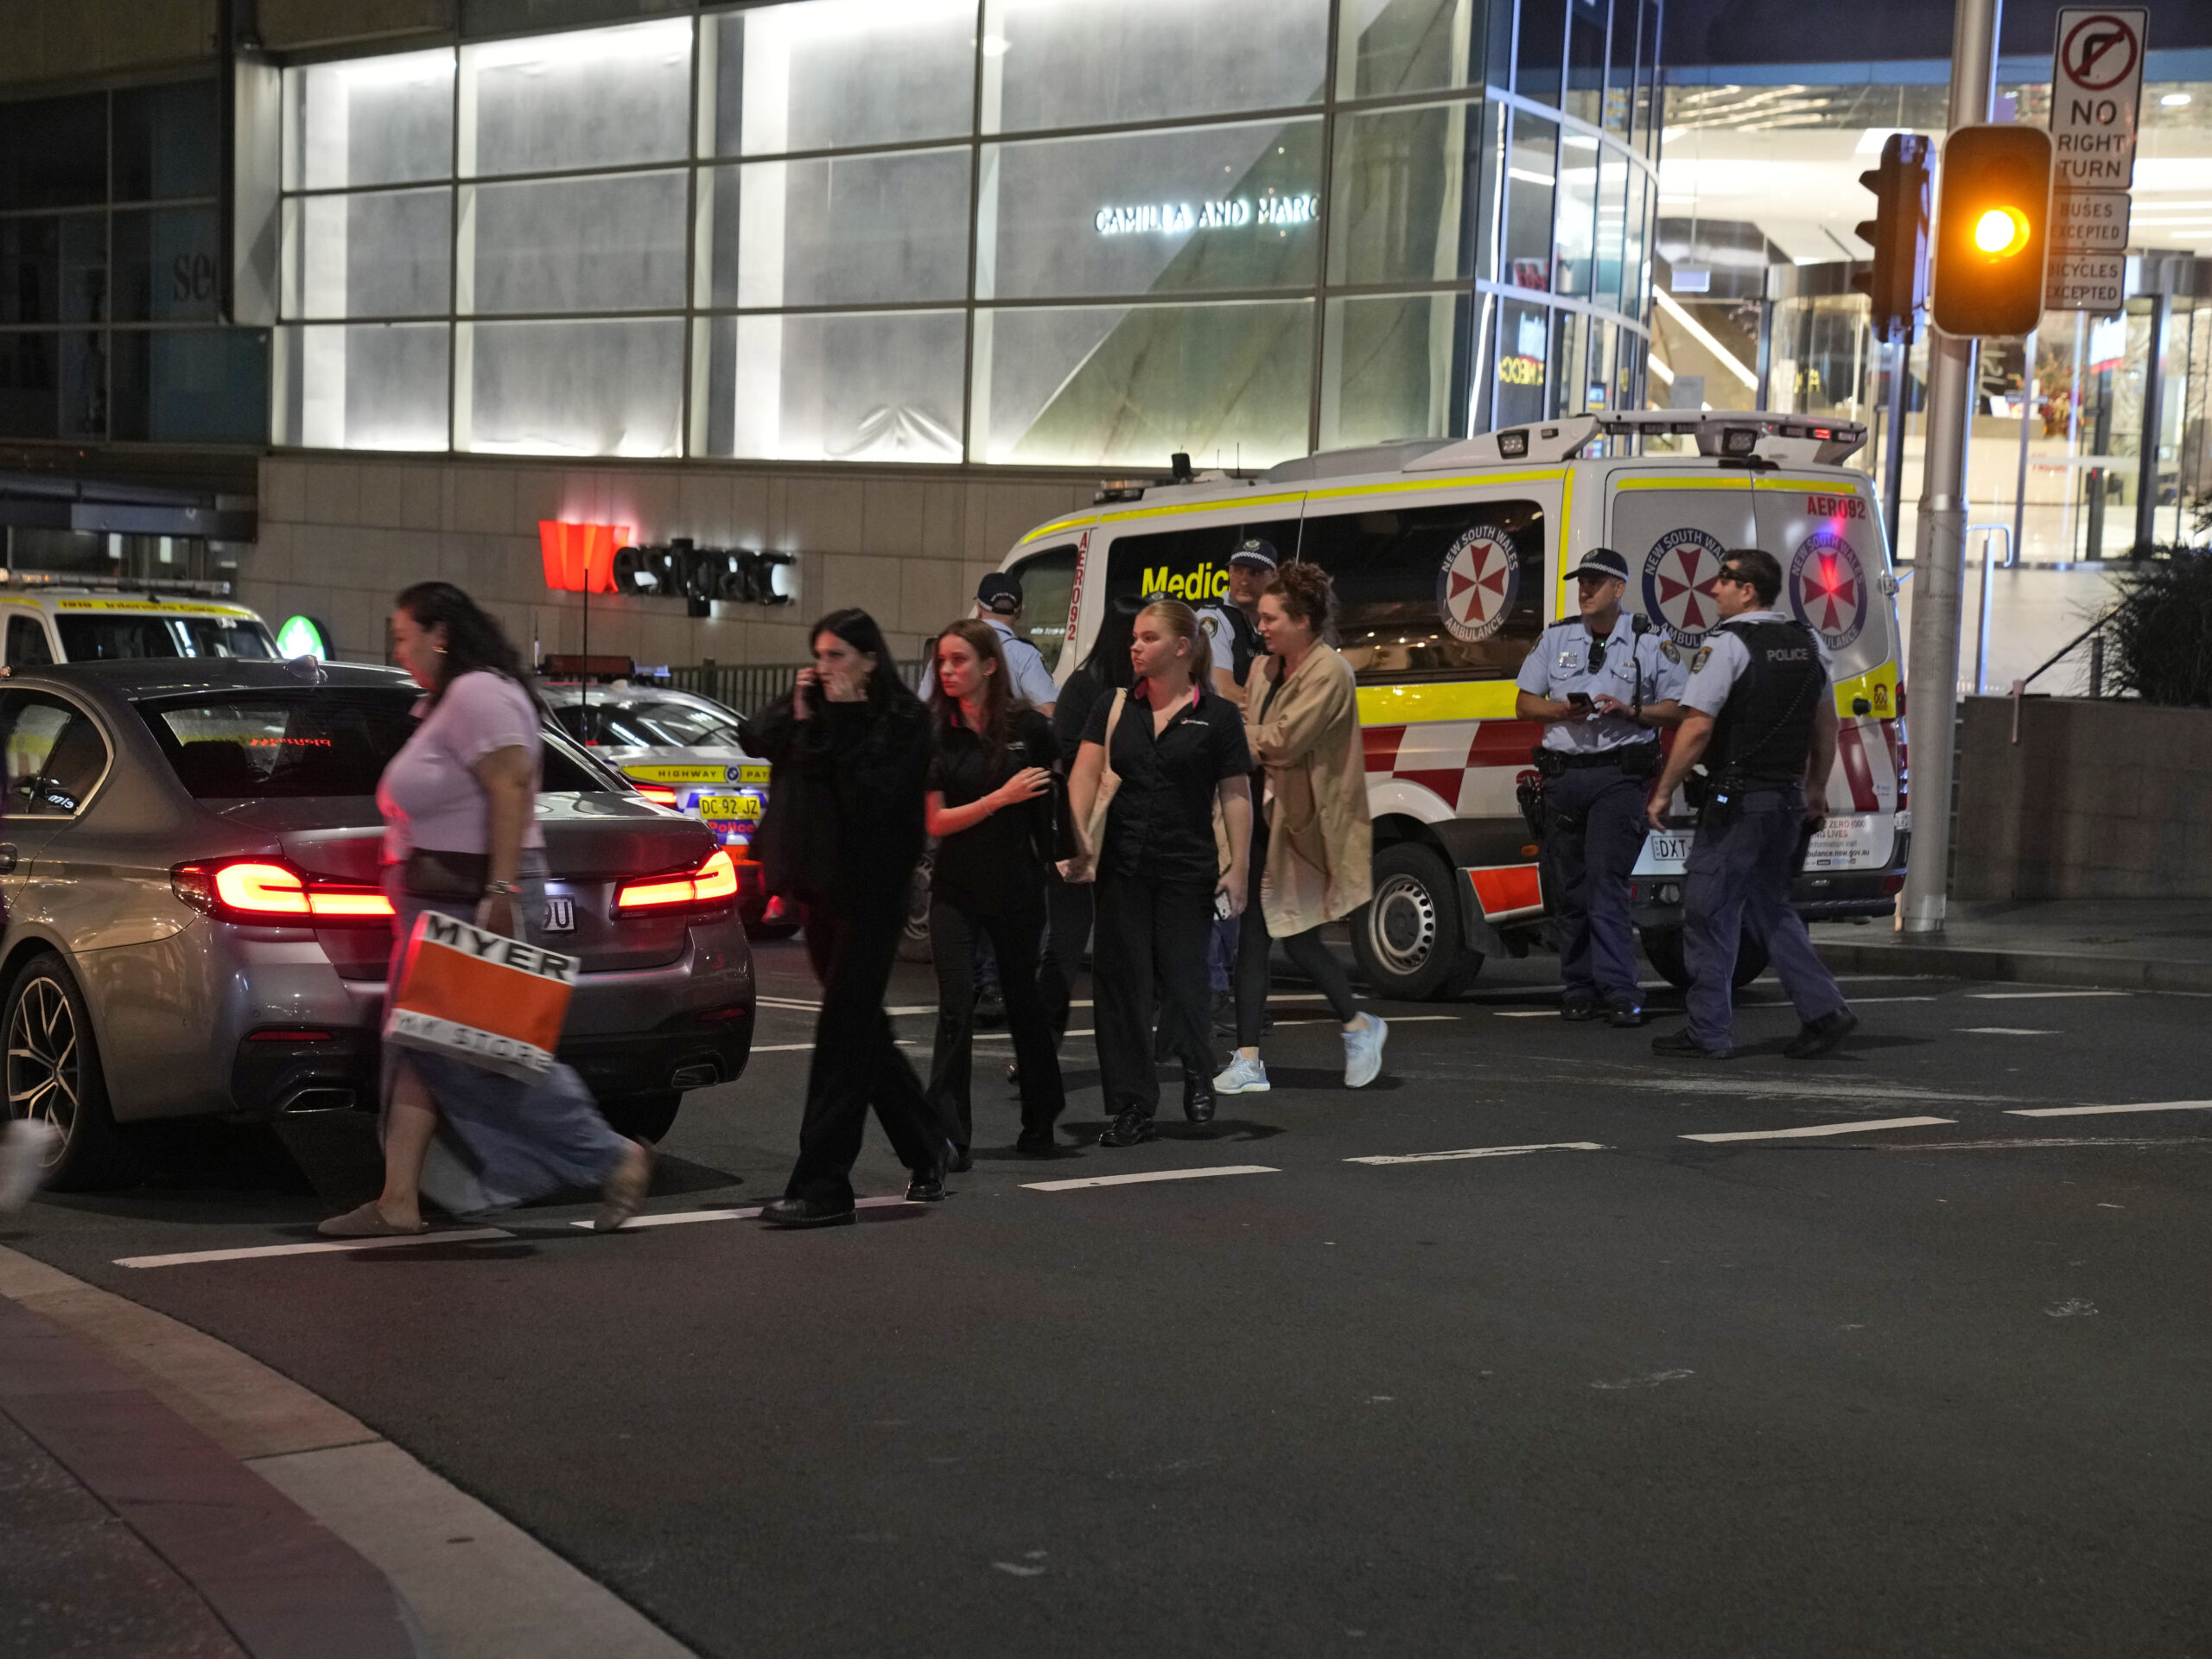 Man stabs 6 people to death in Sydney shopping center before fatally shot by police